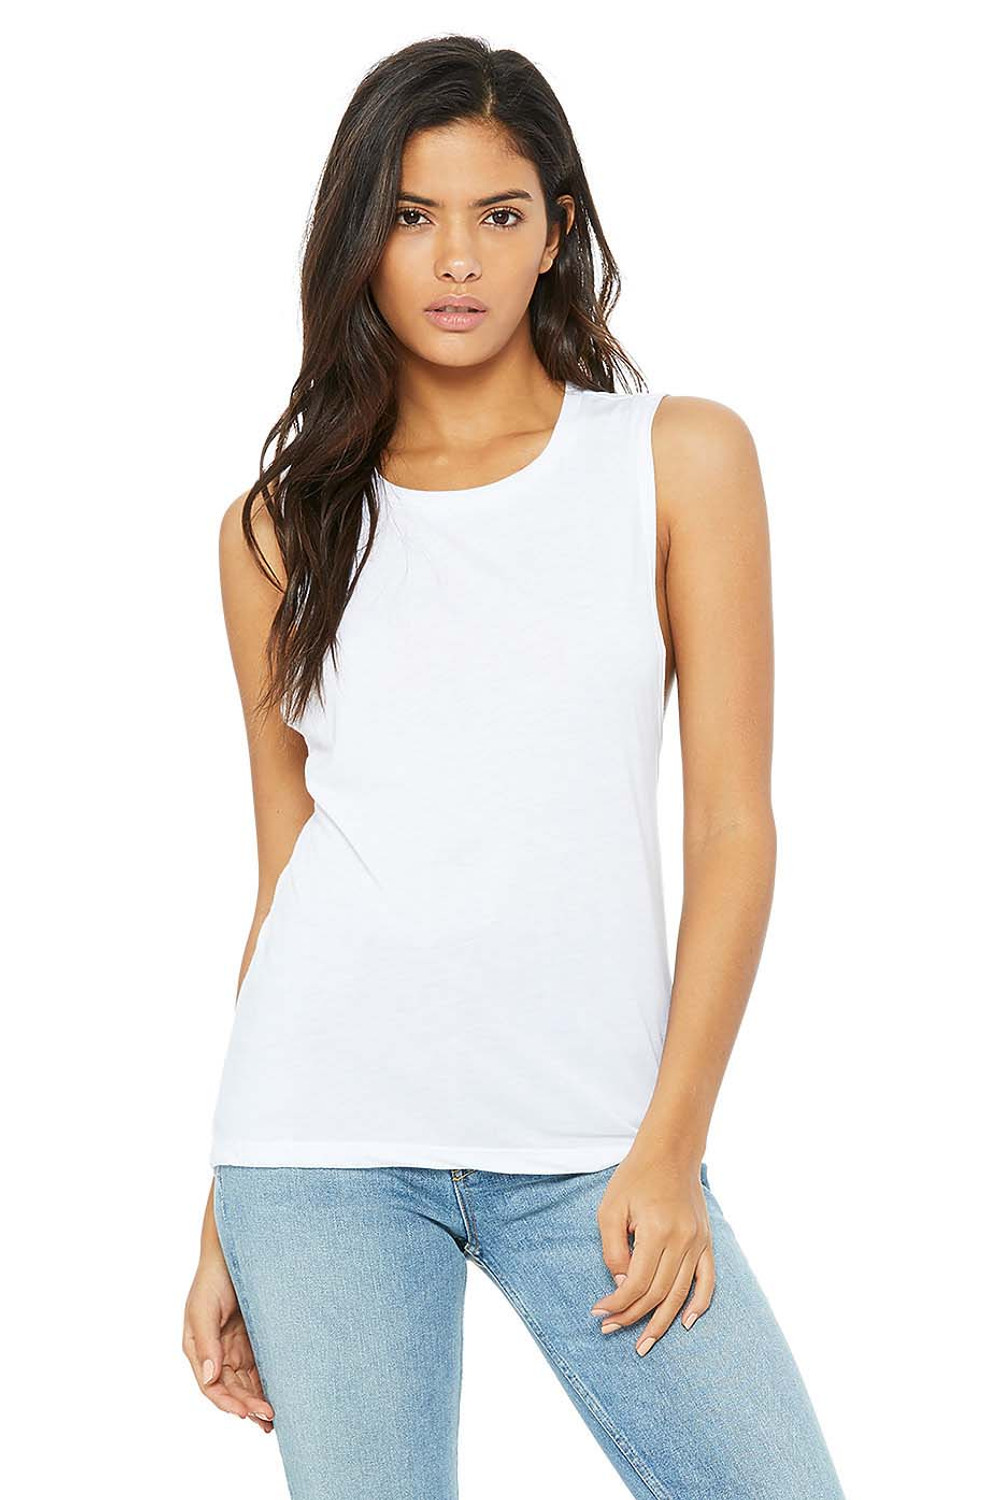 Flair for the Dramatic White Muscle Tank Top